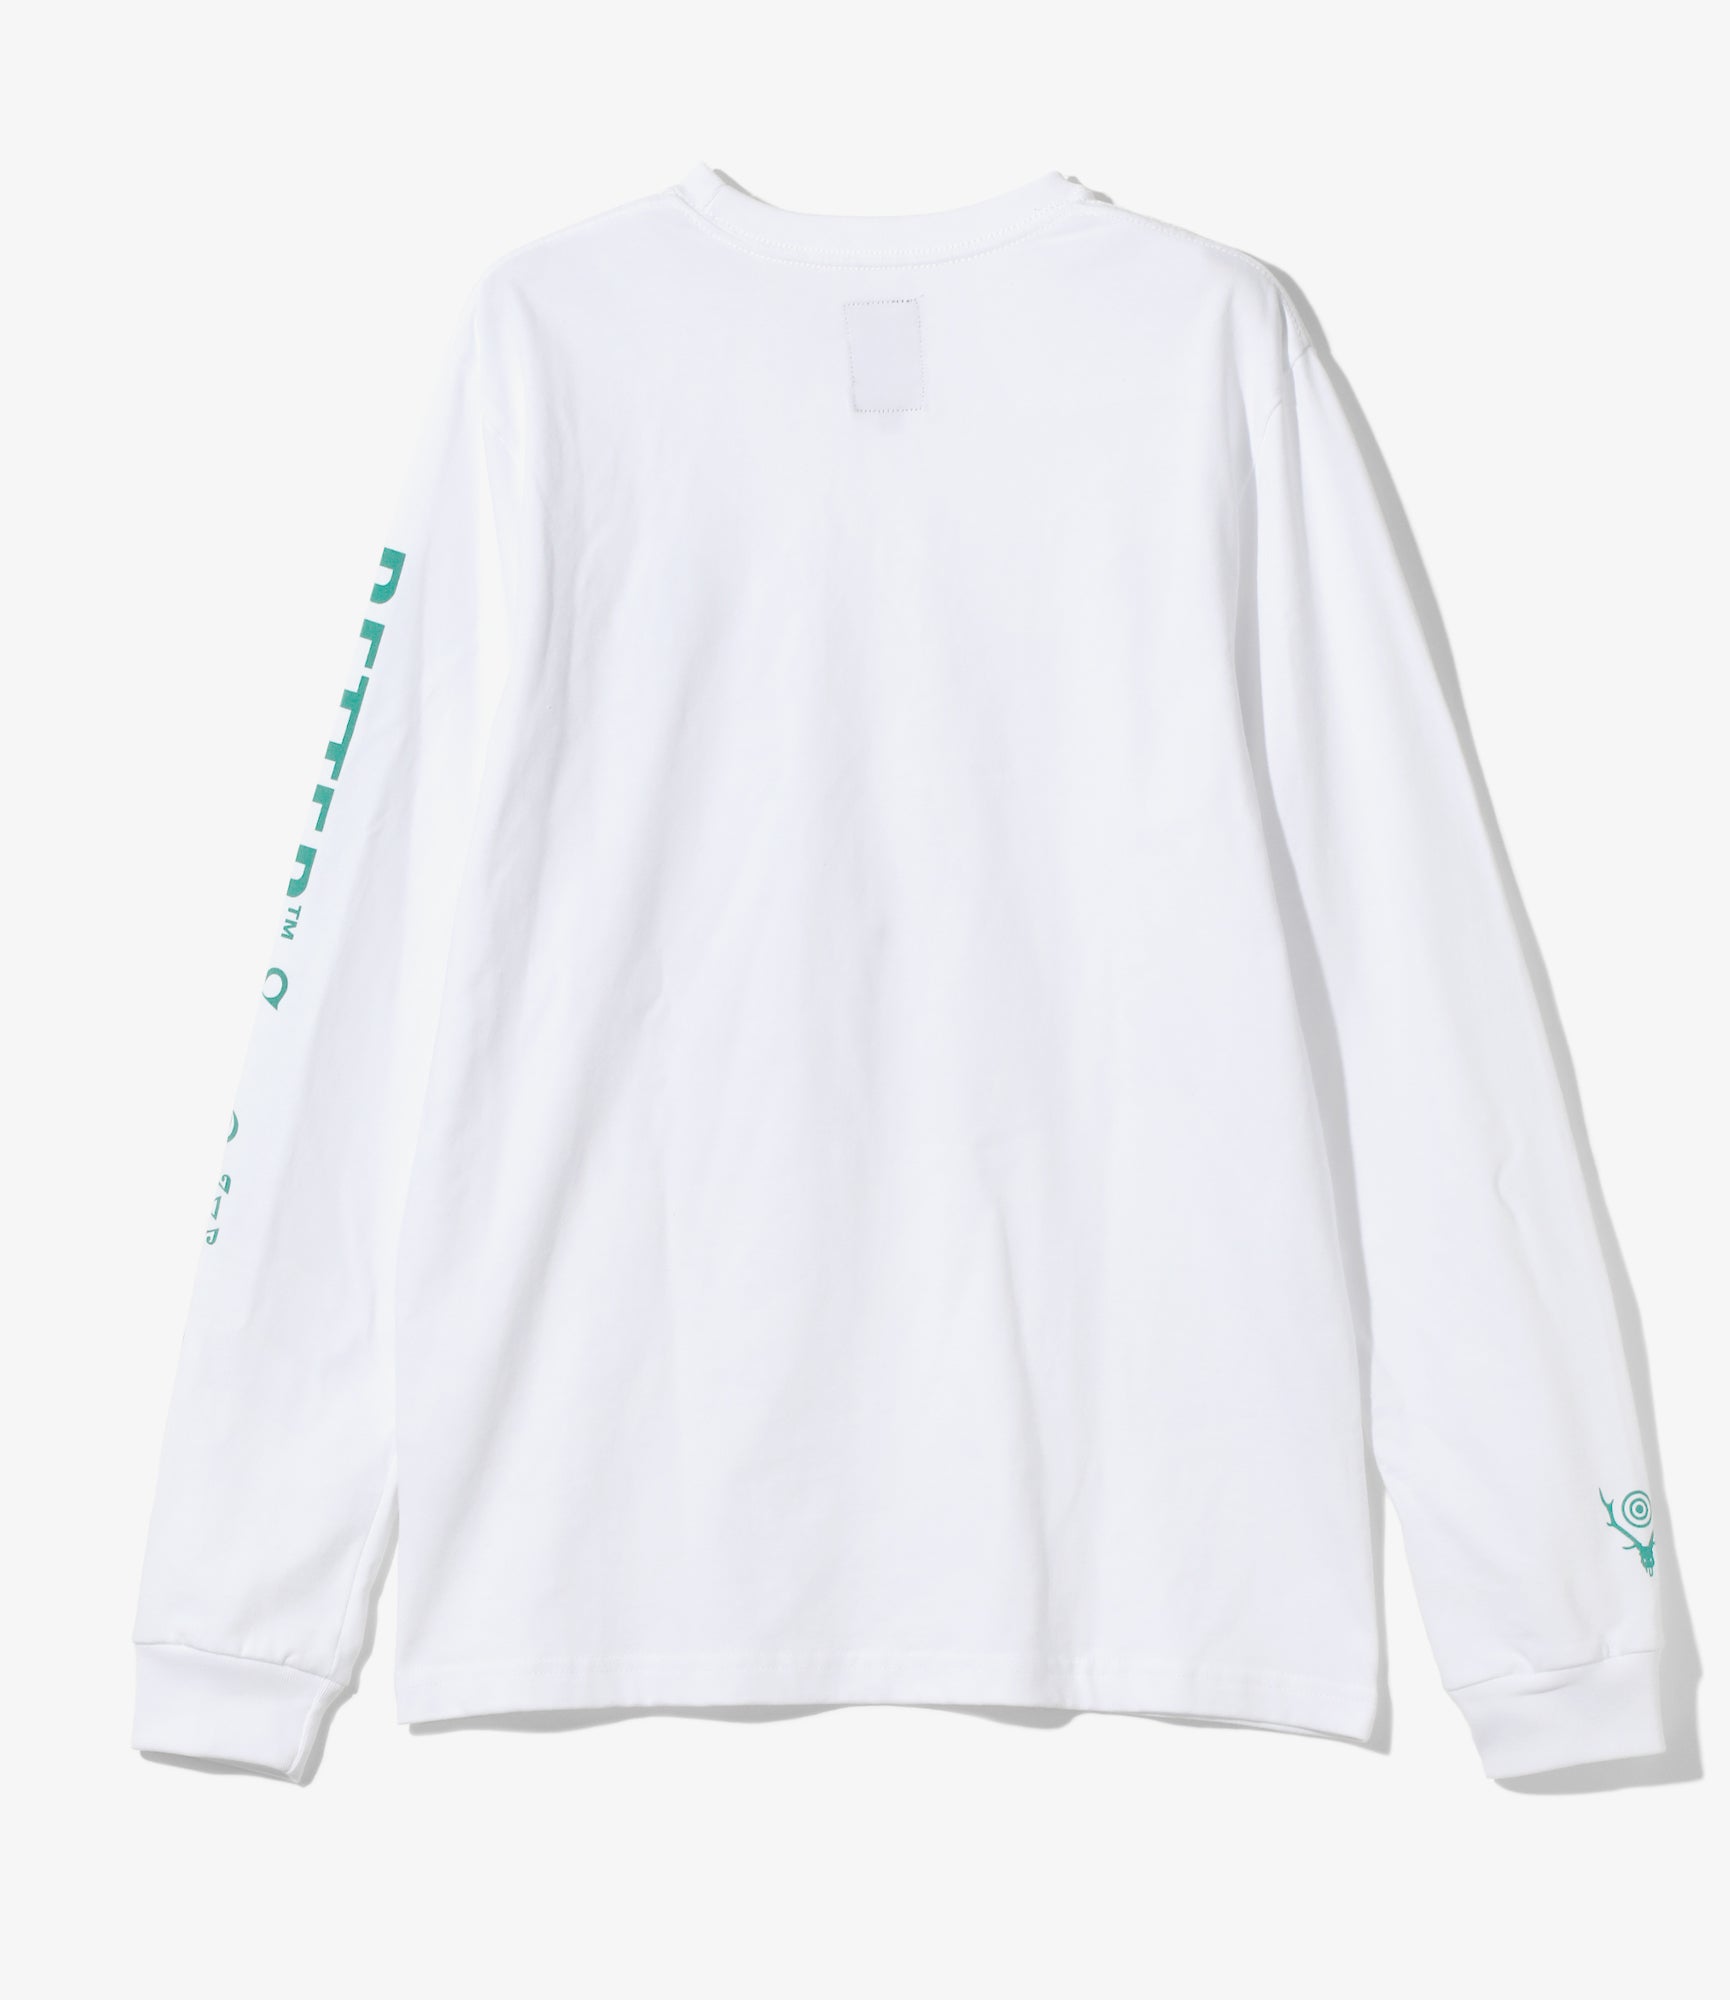 South2 West8 x Better Gift Shop - Long Sleeve T-Shirt - White